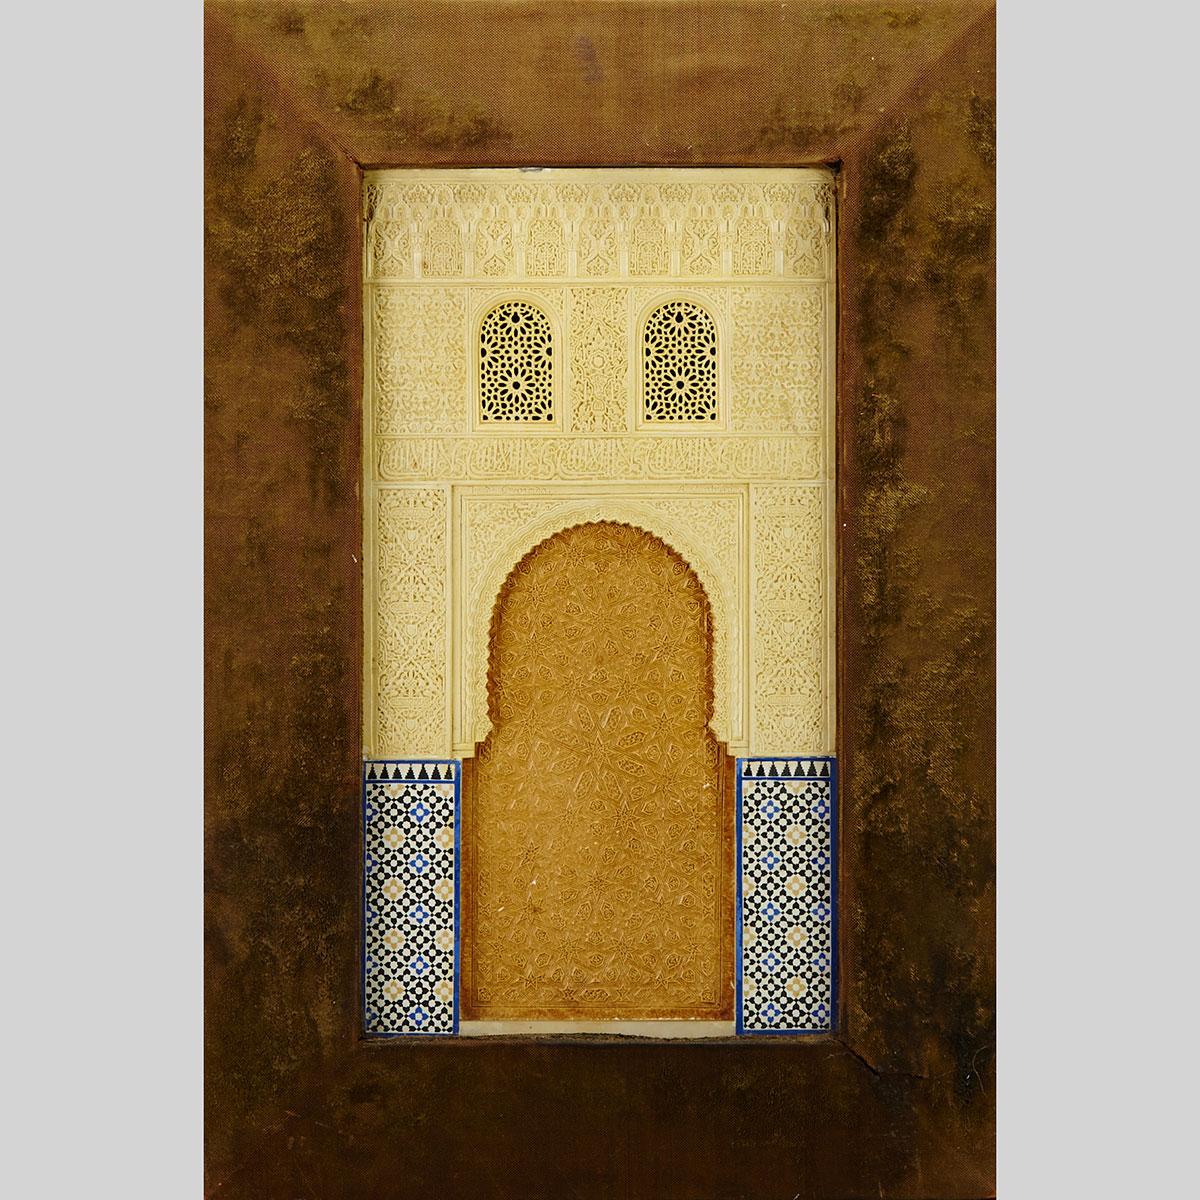 Spanish Painted Plaster Relief Model of an Arch from the Alhambra Palace by Rafael Contreras, c.1865